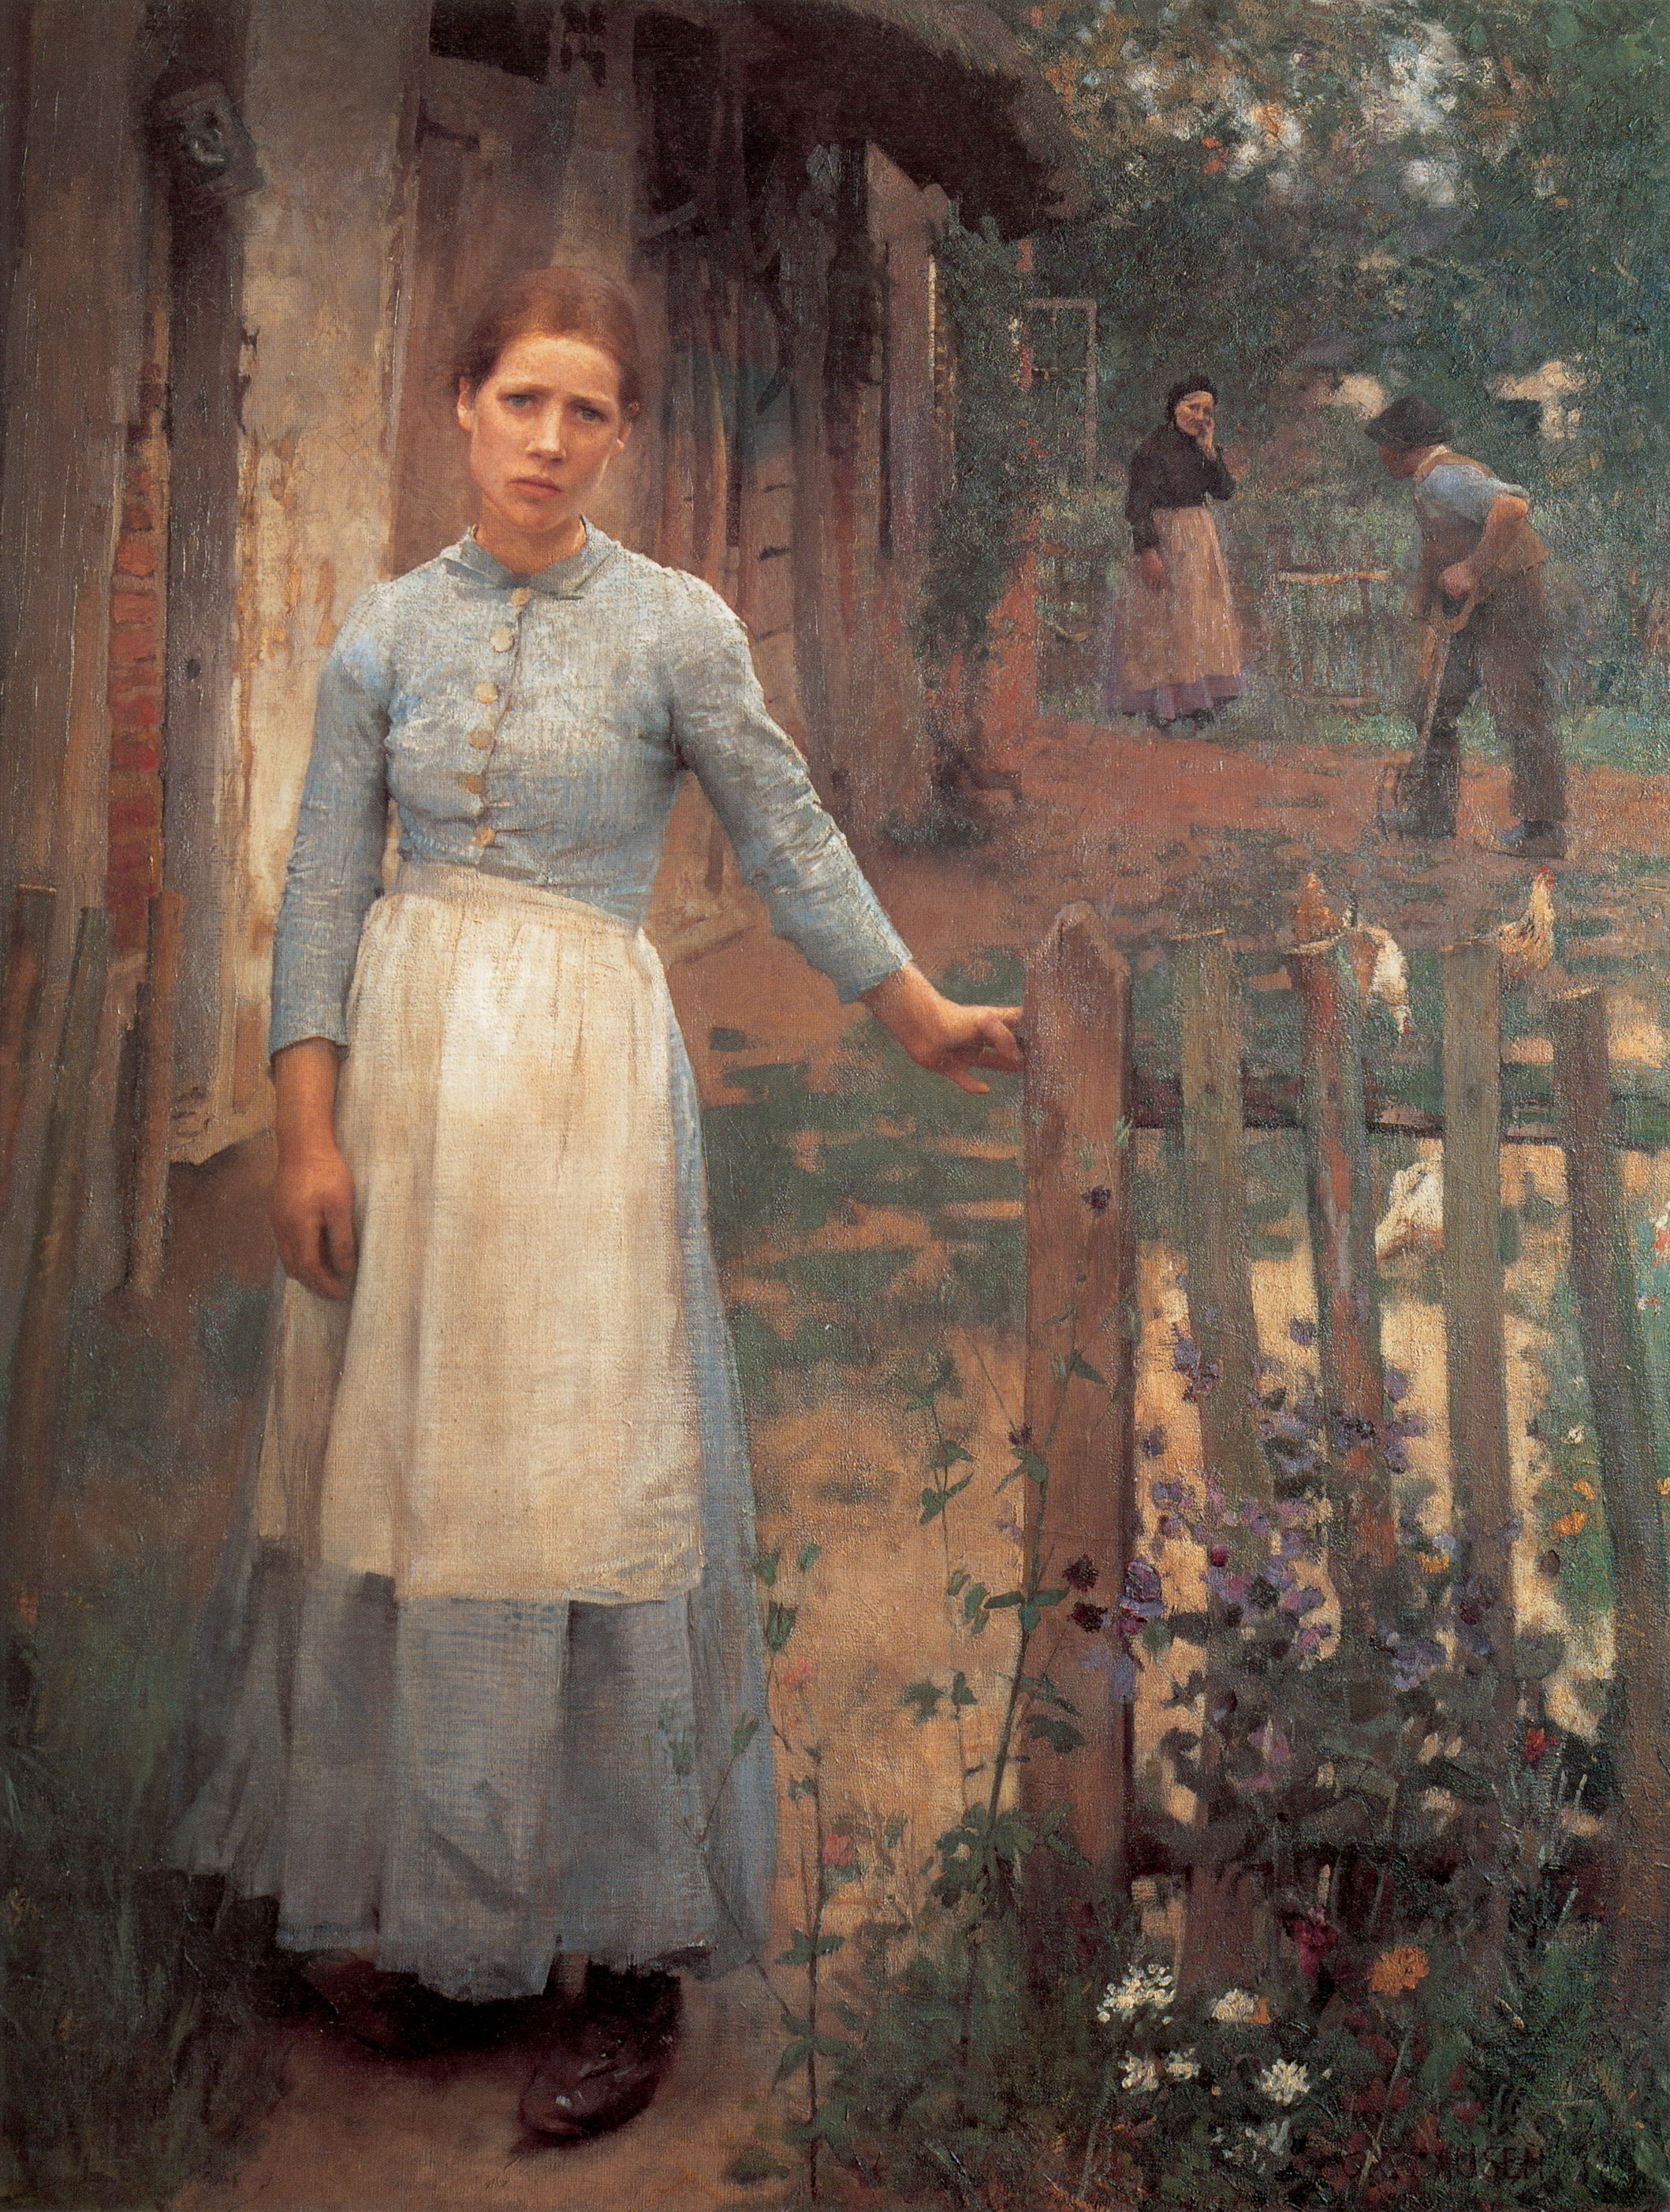 The Girl at the Gate by Sir George Clausen